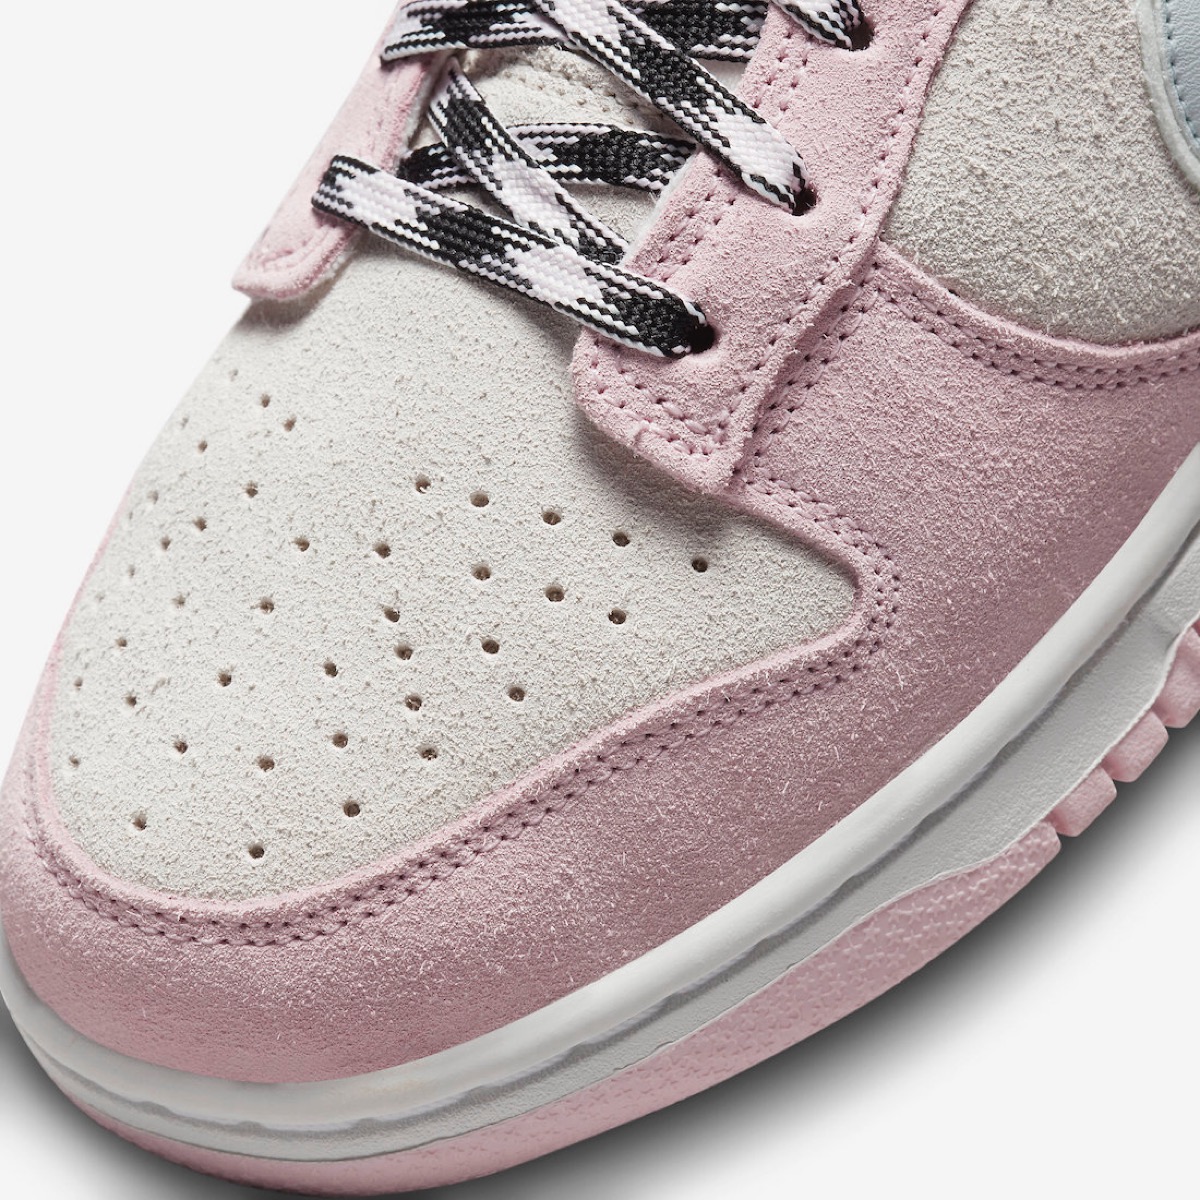 Nike Wmns Dunk Low LX “Black Suede” & “Pink Foam”が国内1月17日に